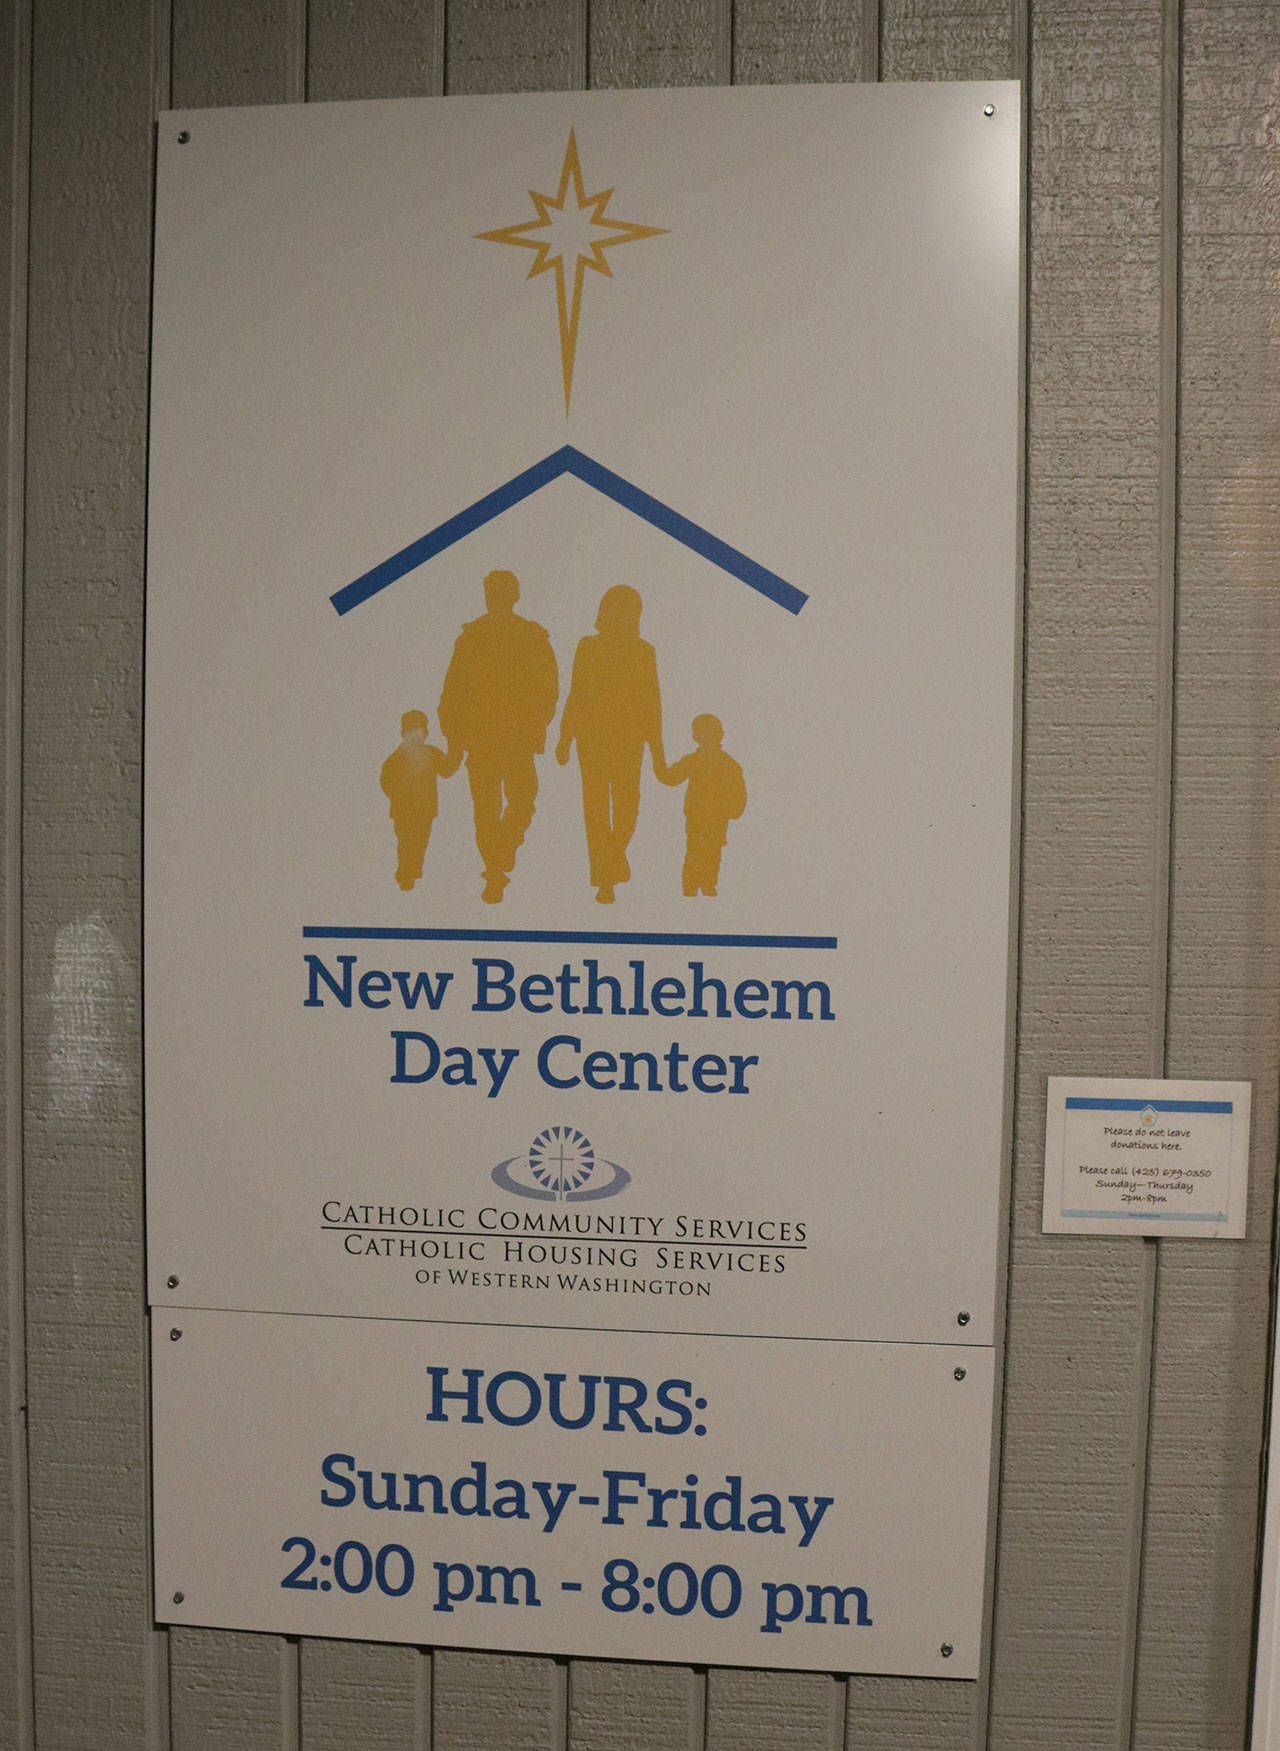 The New Bethlehem Day Center is located at Salt House at 11920 N.E. 80th St., across from Lake Washington High School and west of Kirkland Cemetery. Megan Campbell/Kirkland Reporter